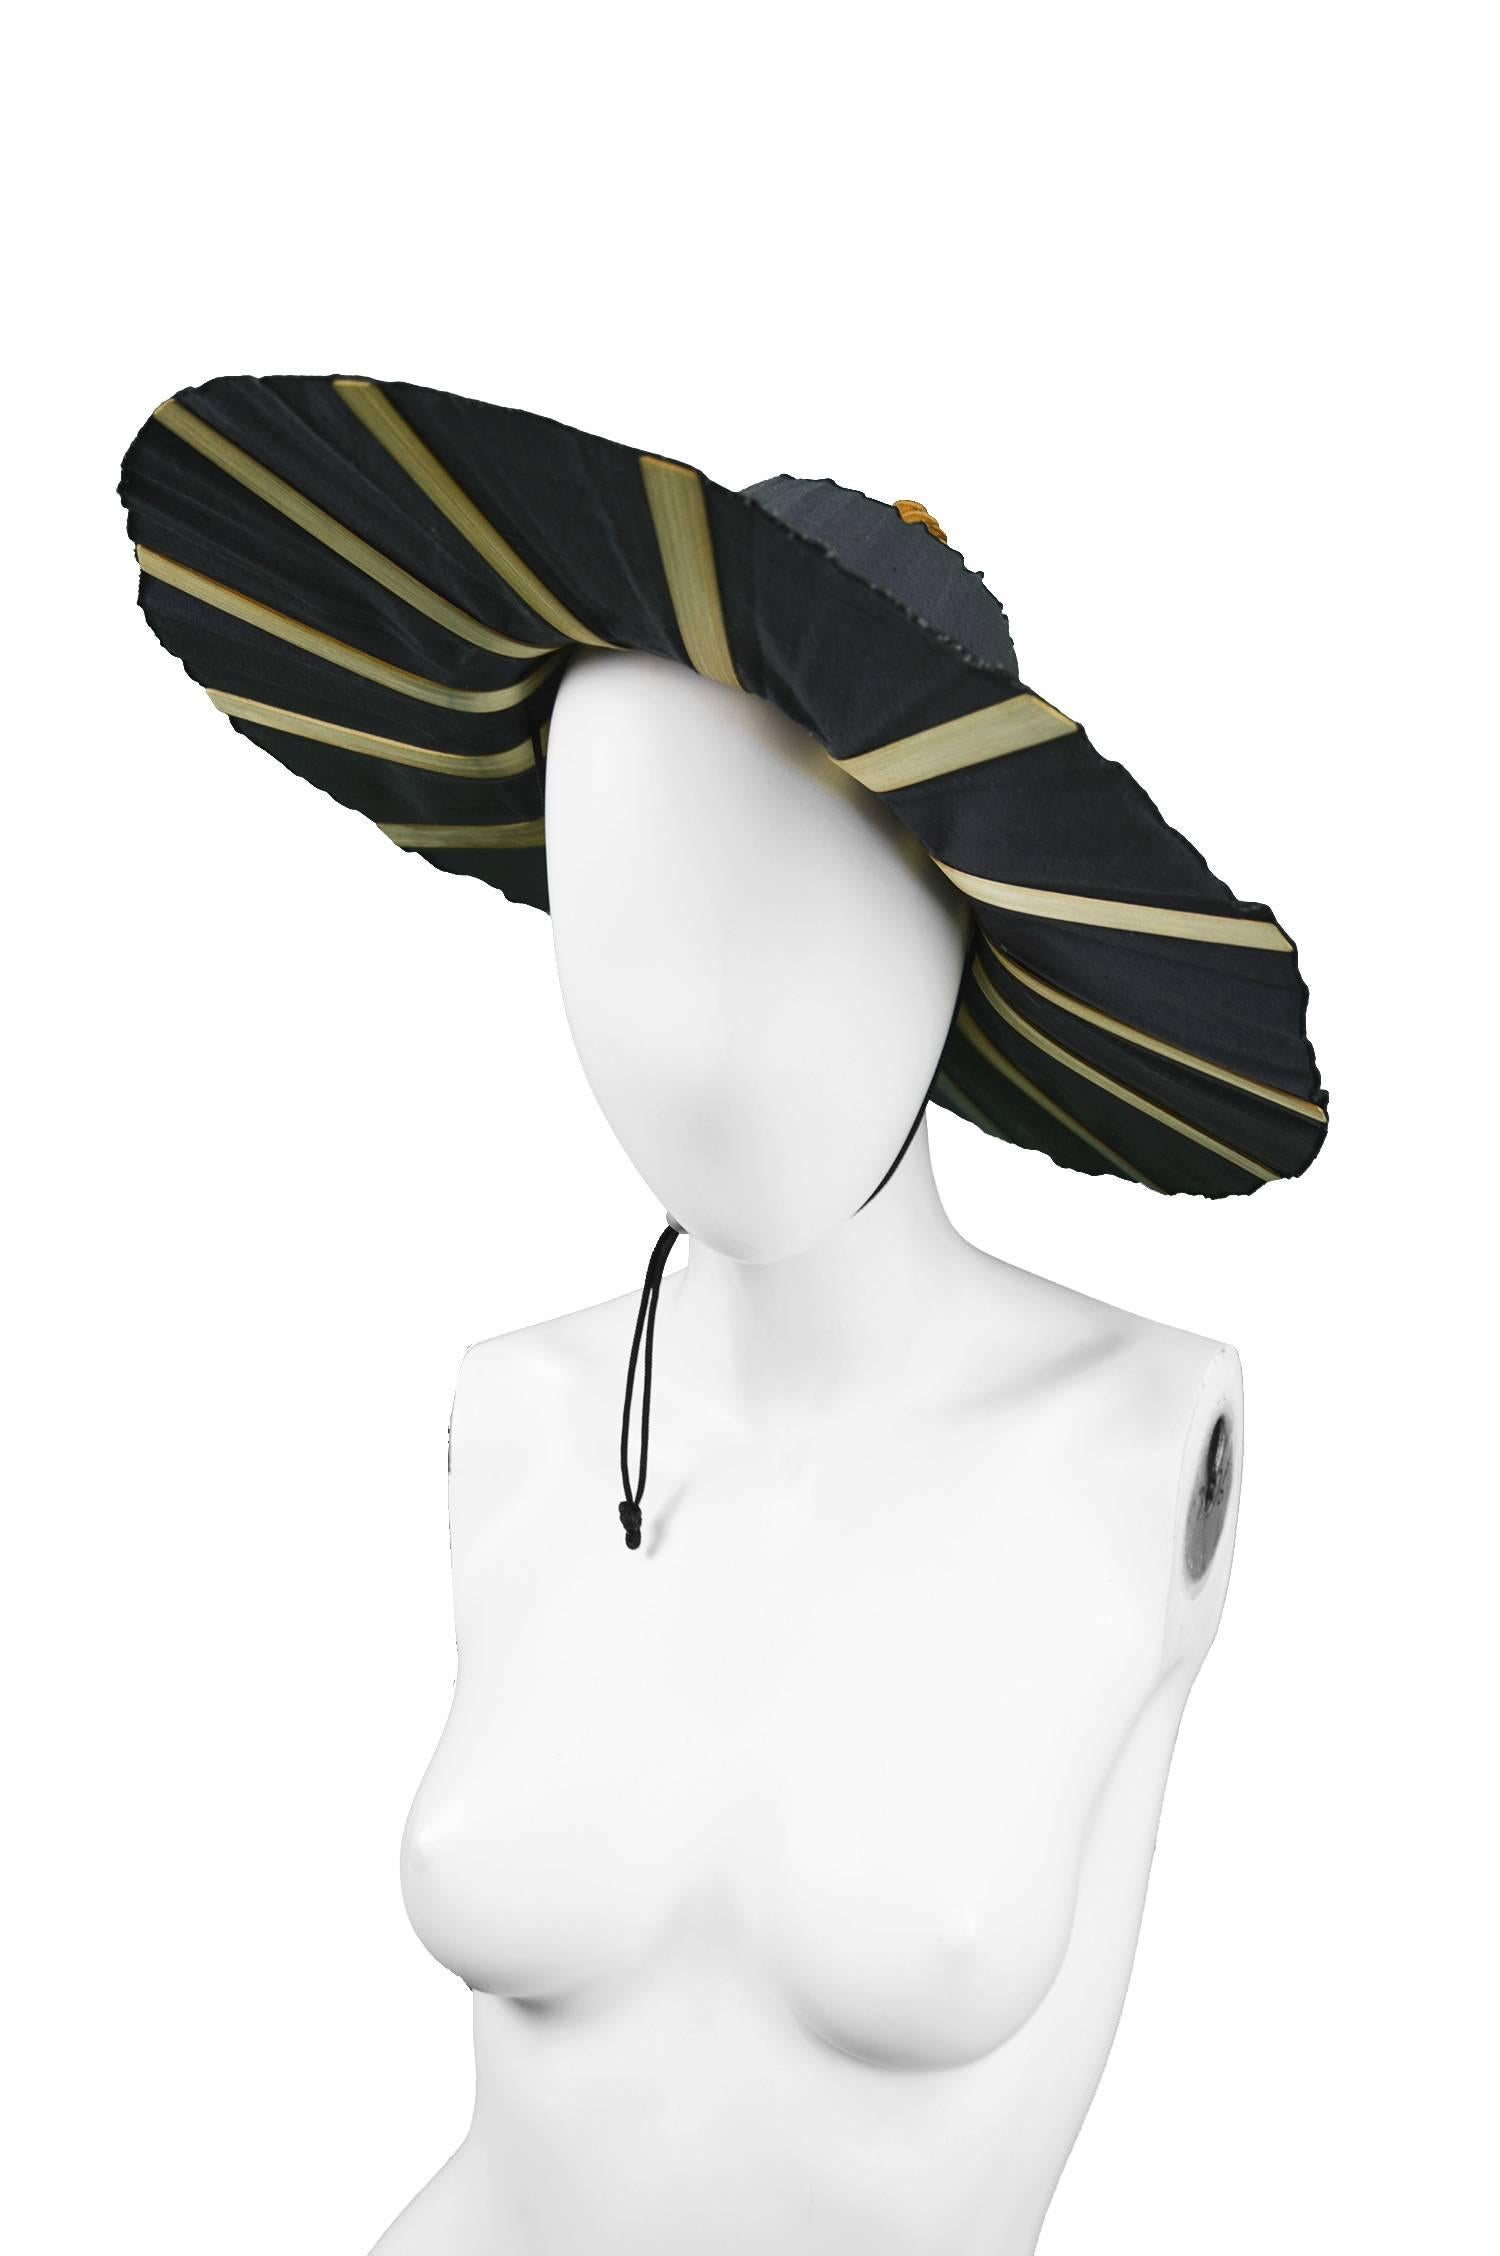 Heather Allan Architectural Folding Wood and Cotton Fan Sun Hat, 1990s In Good Condition For Sale In Doncaster, South Yorkshire